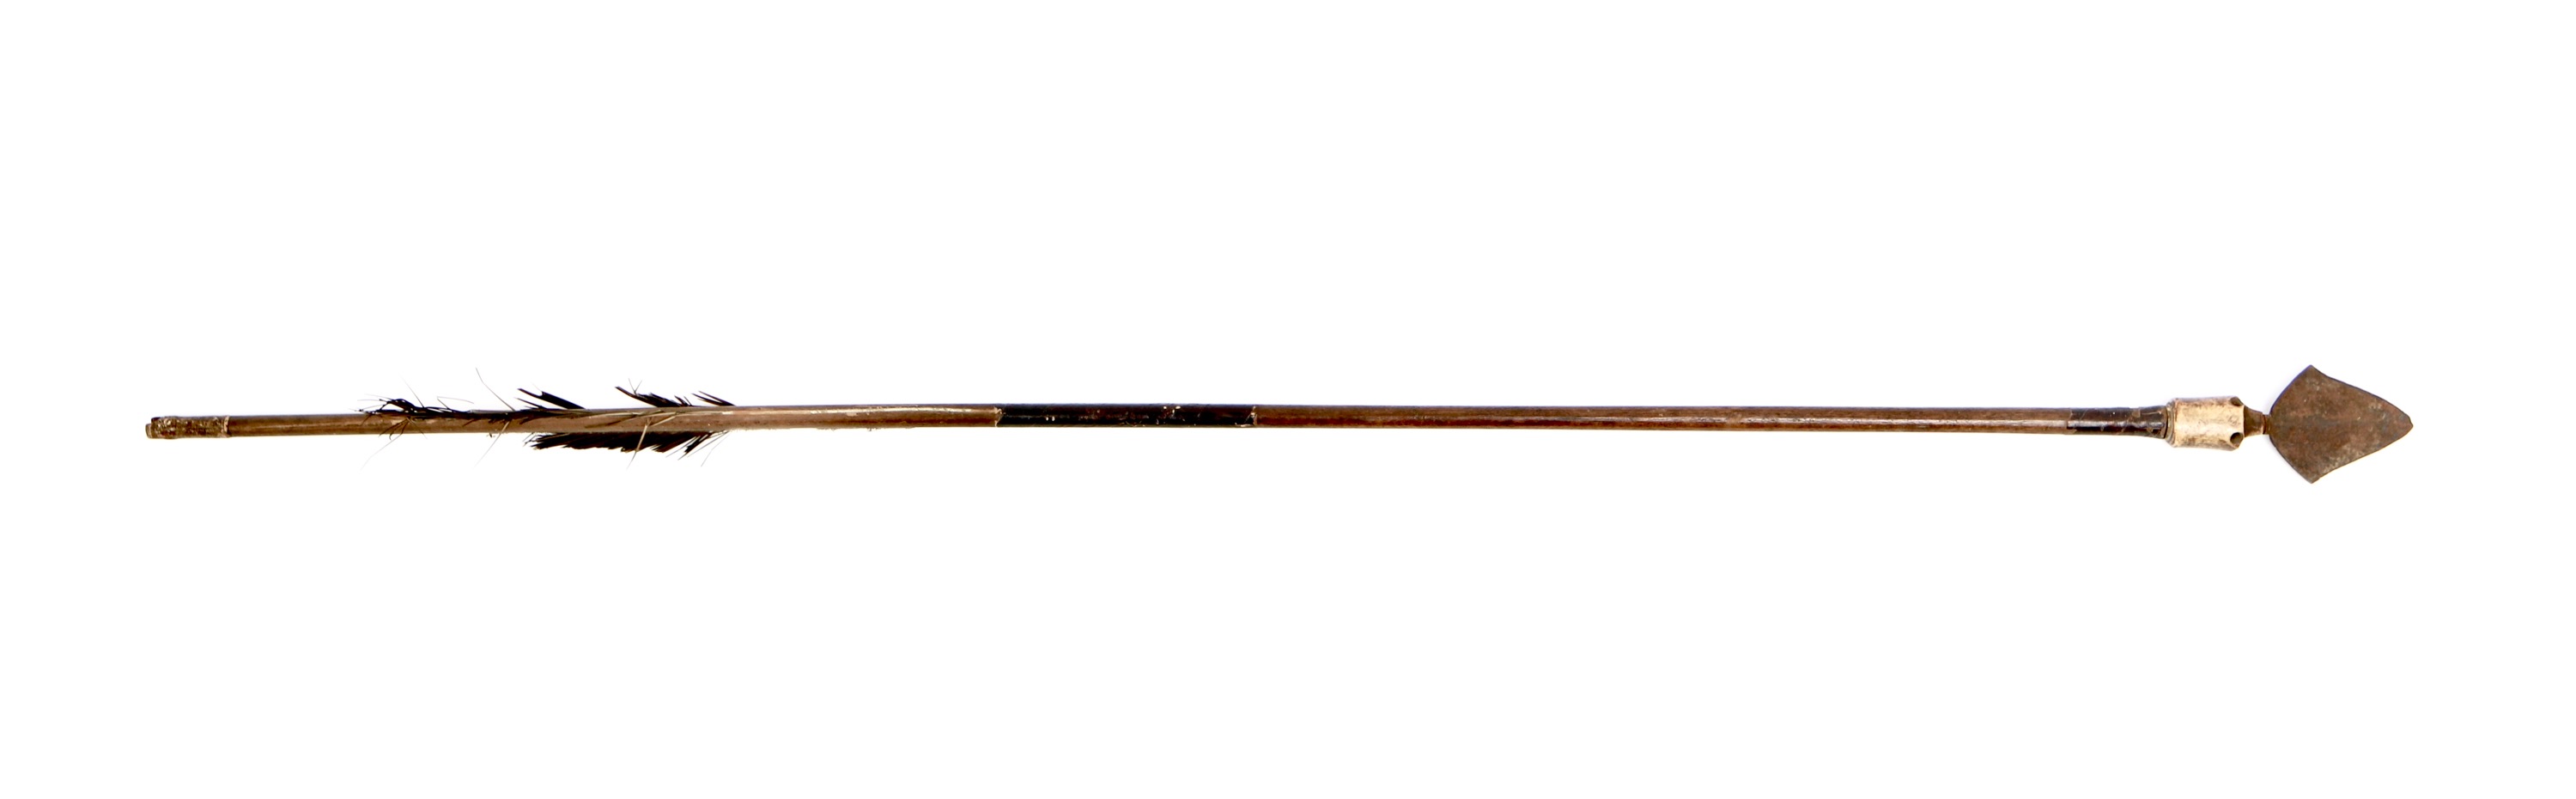 Qing whistling arrow